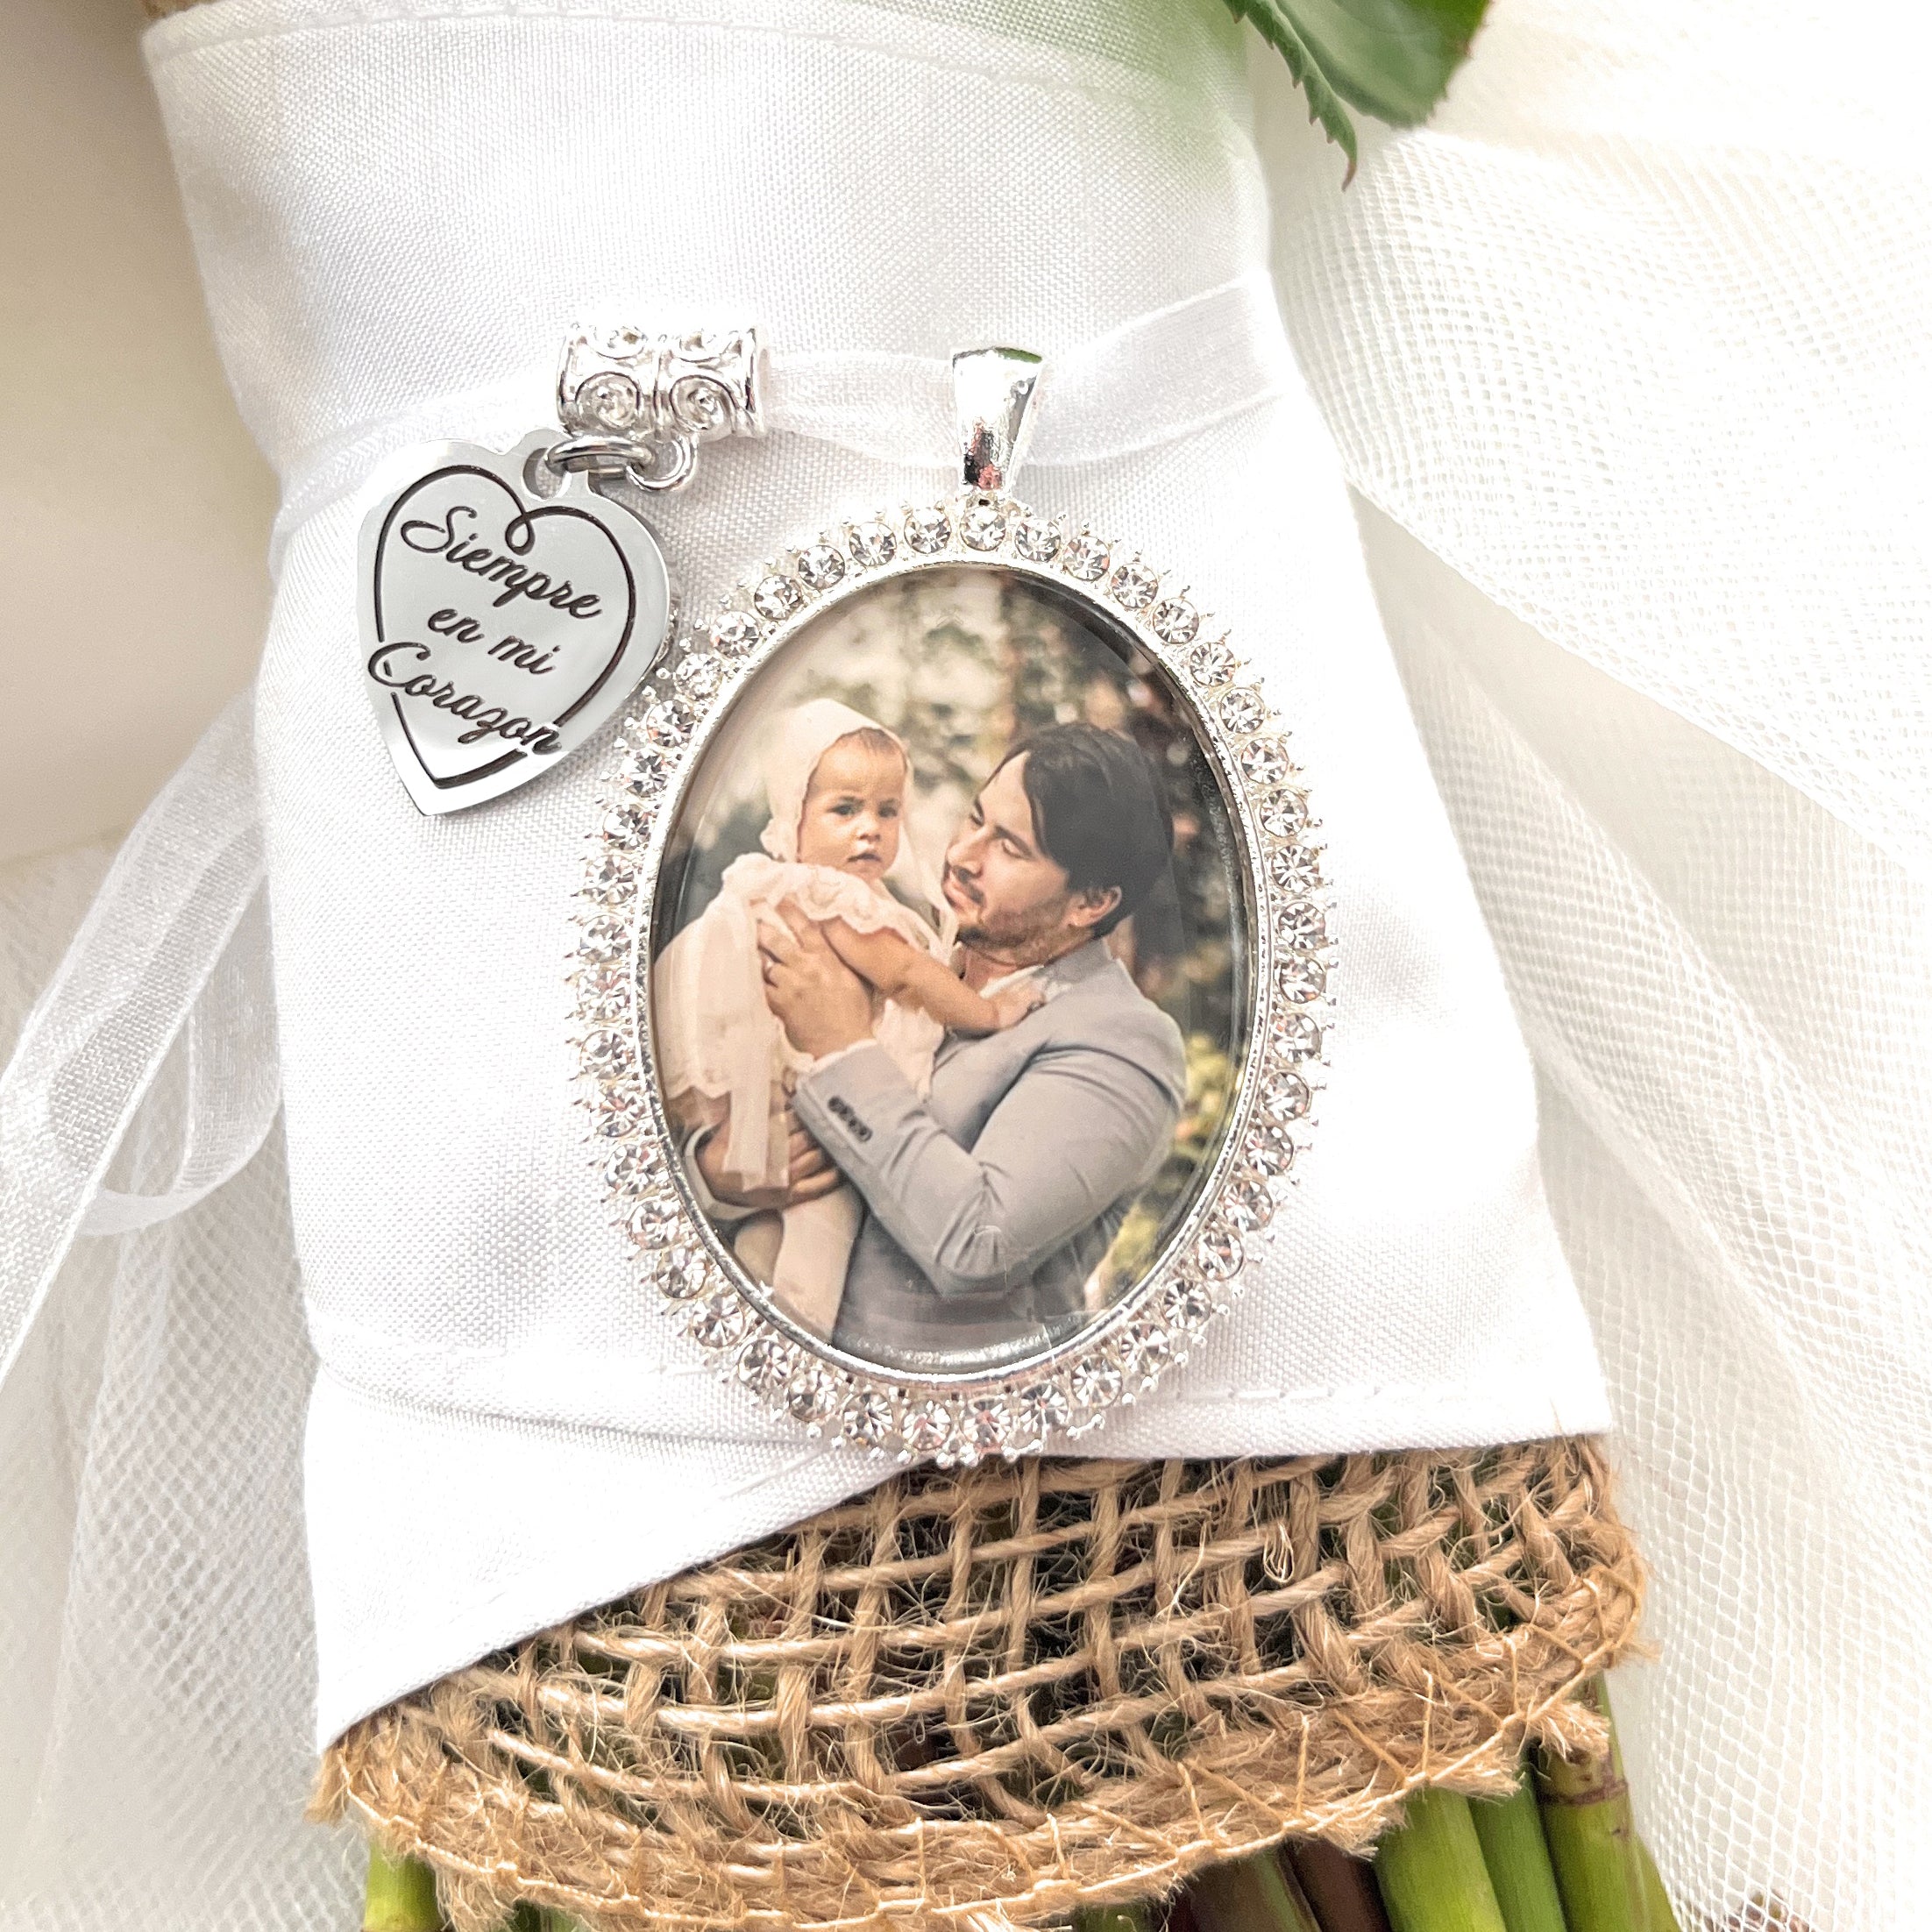 Spanish Bridal Memorial Photo Bouquet Charm in oval shape with clear rhinestones around edge of pendant. Image size is roughly 30mmx40mm. Comes with heart shape charm that reads, Siempre en mi Corazon. Pendant and charm come on a white ribbon to attach to bridal bouquet.